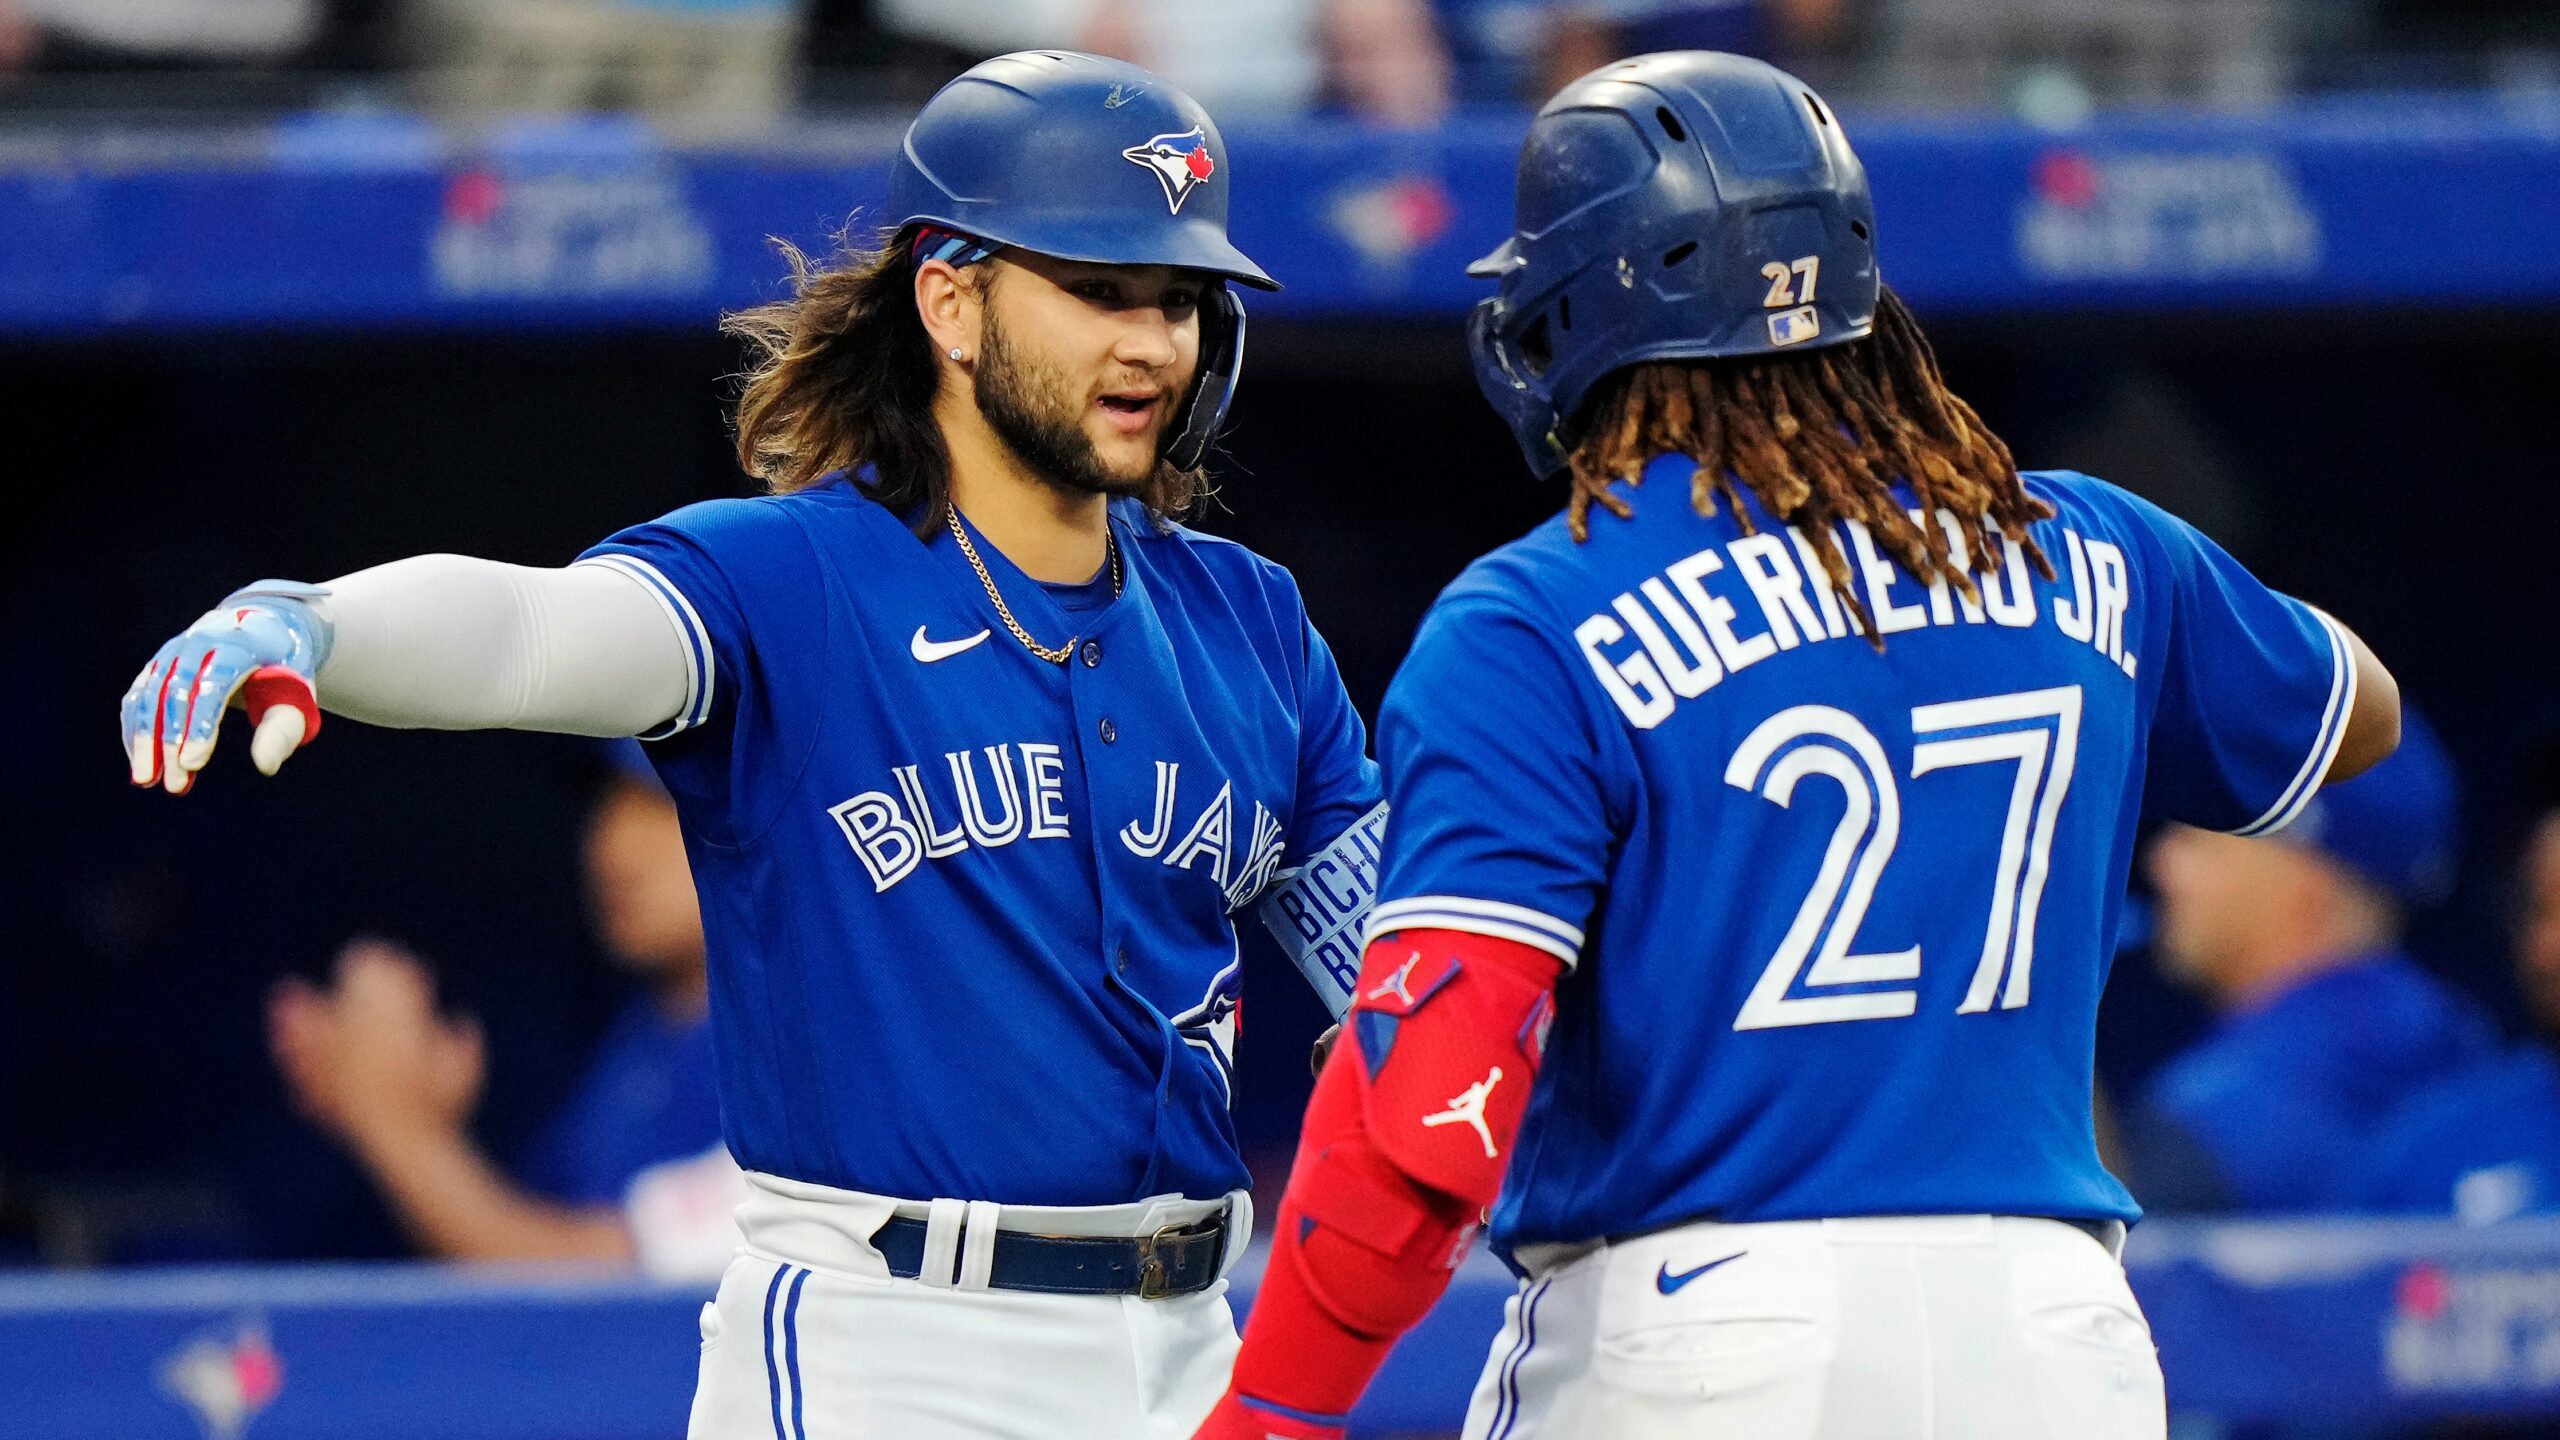 After a brutal loss, the Blue Jays take a crucial step toward trading standout players